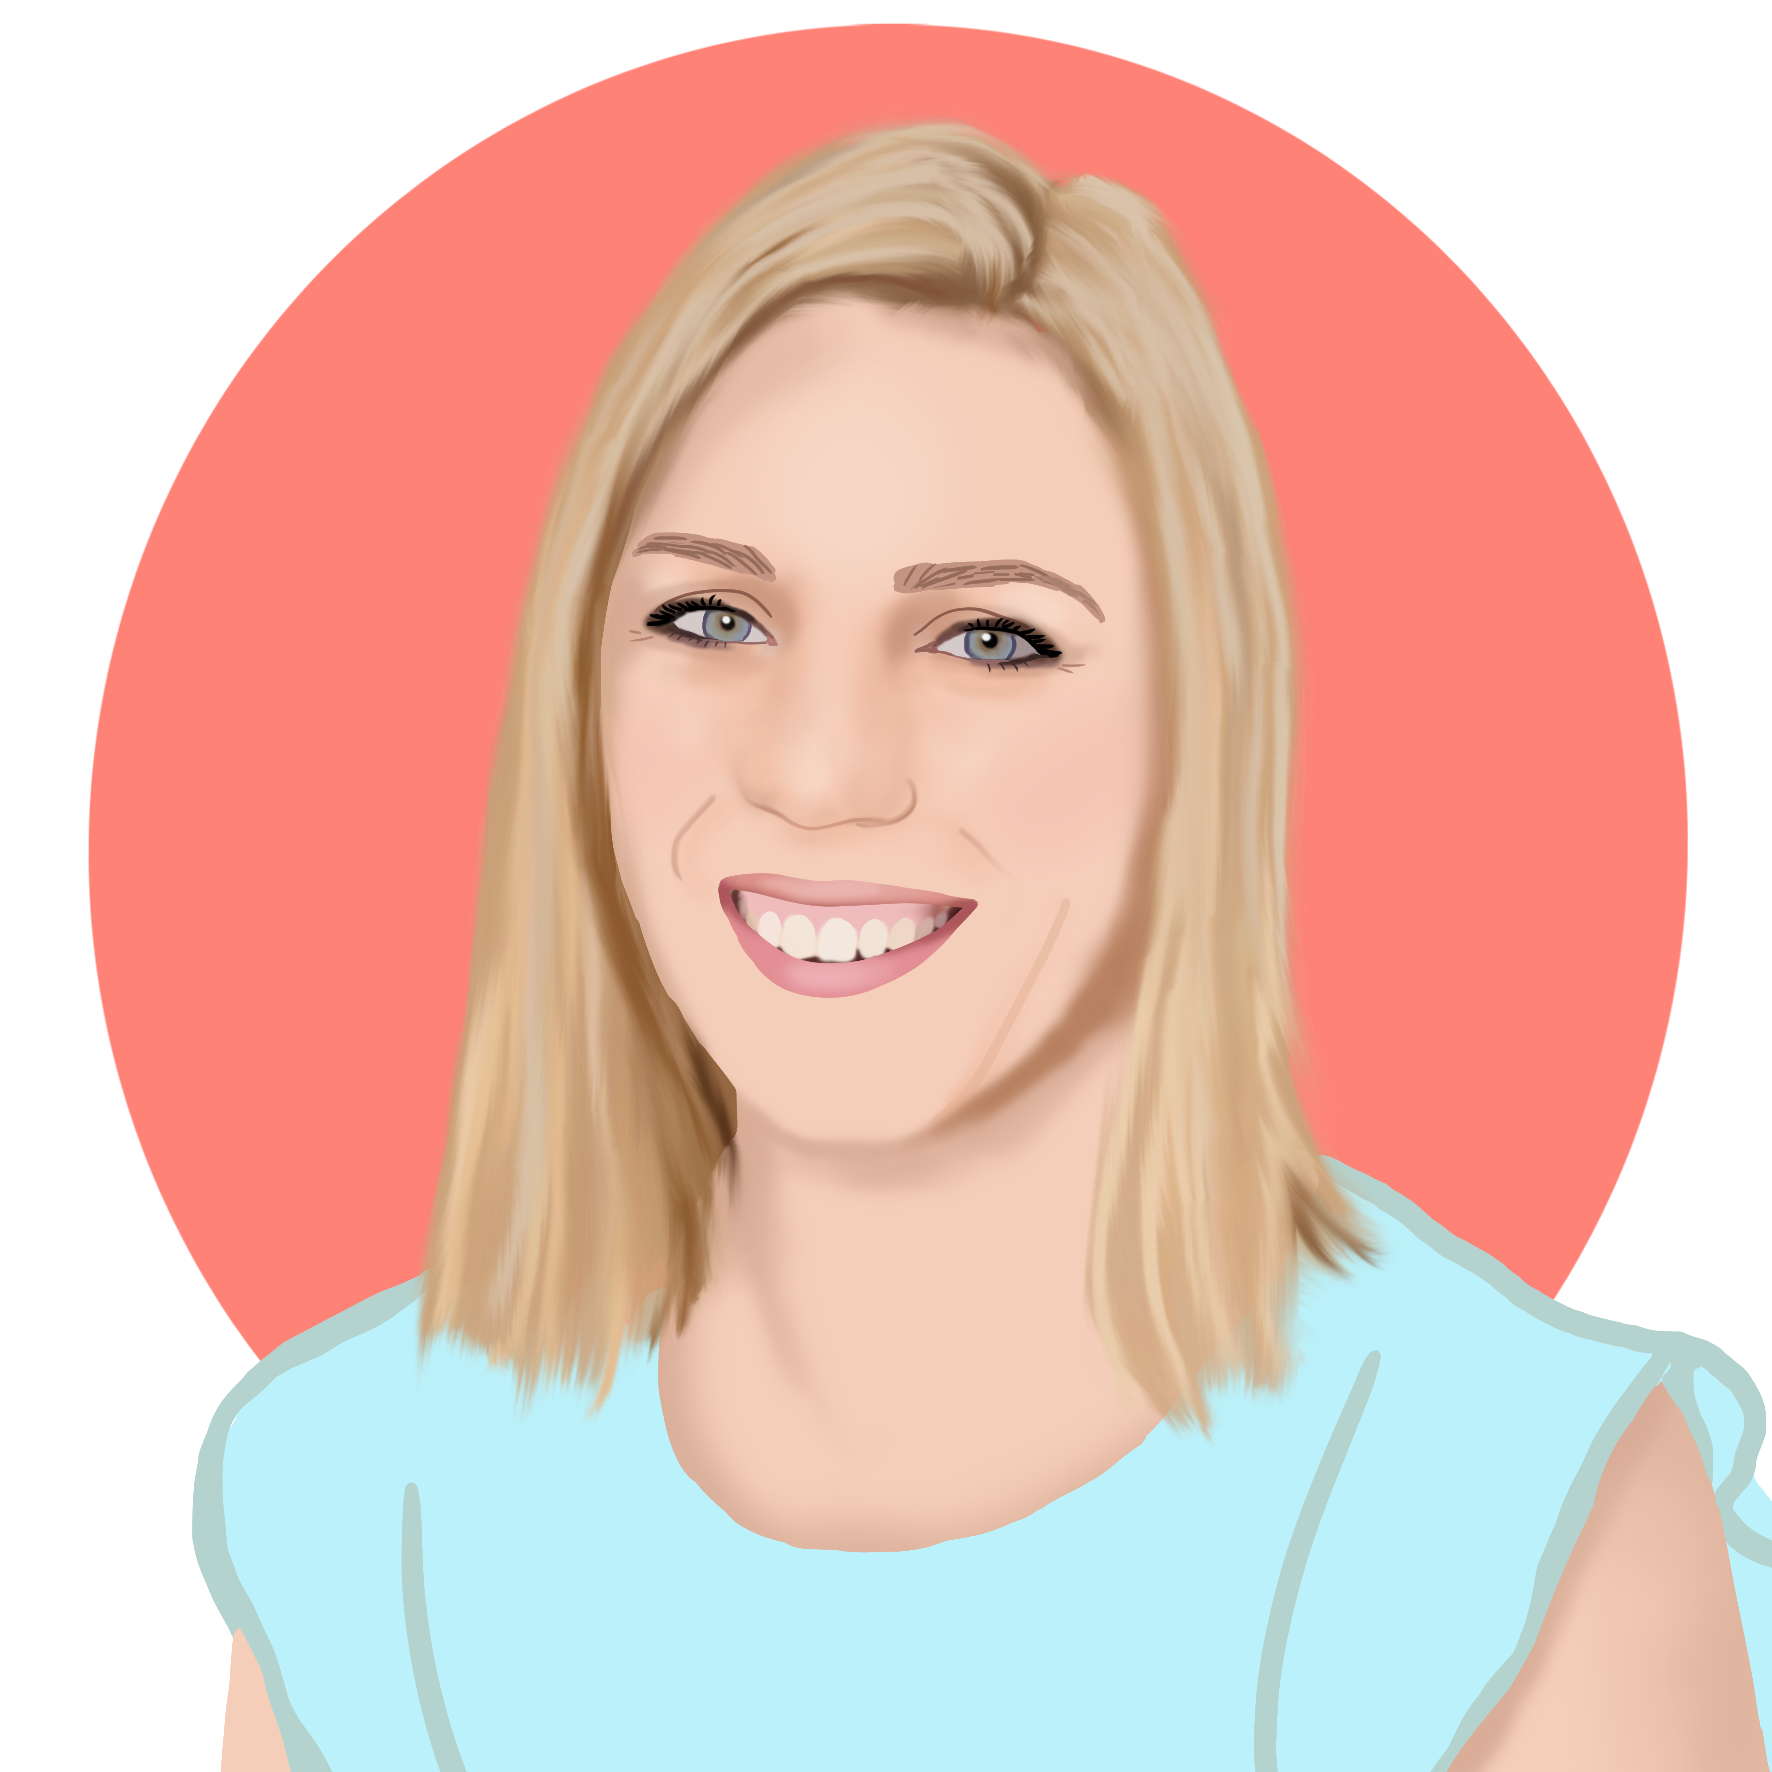 Profile illustration of Sarah Gill with shoulder length blonde hair, blue eyes and light blue top on a circled peach background